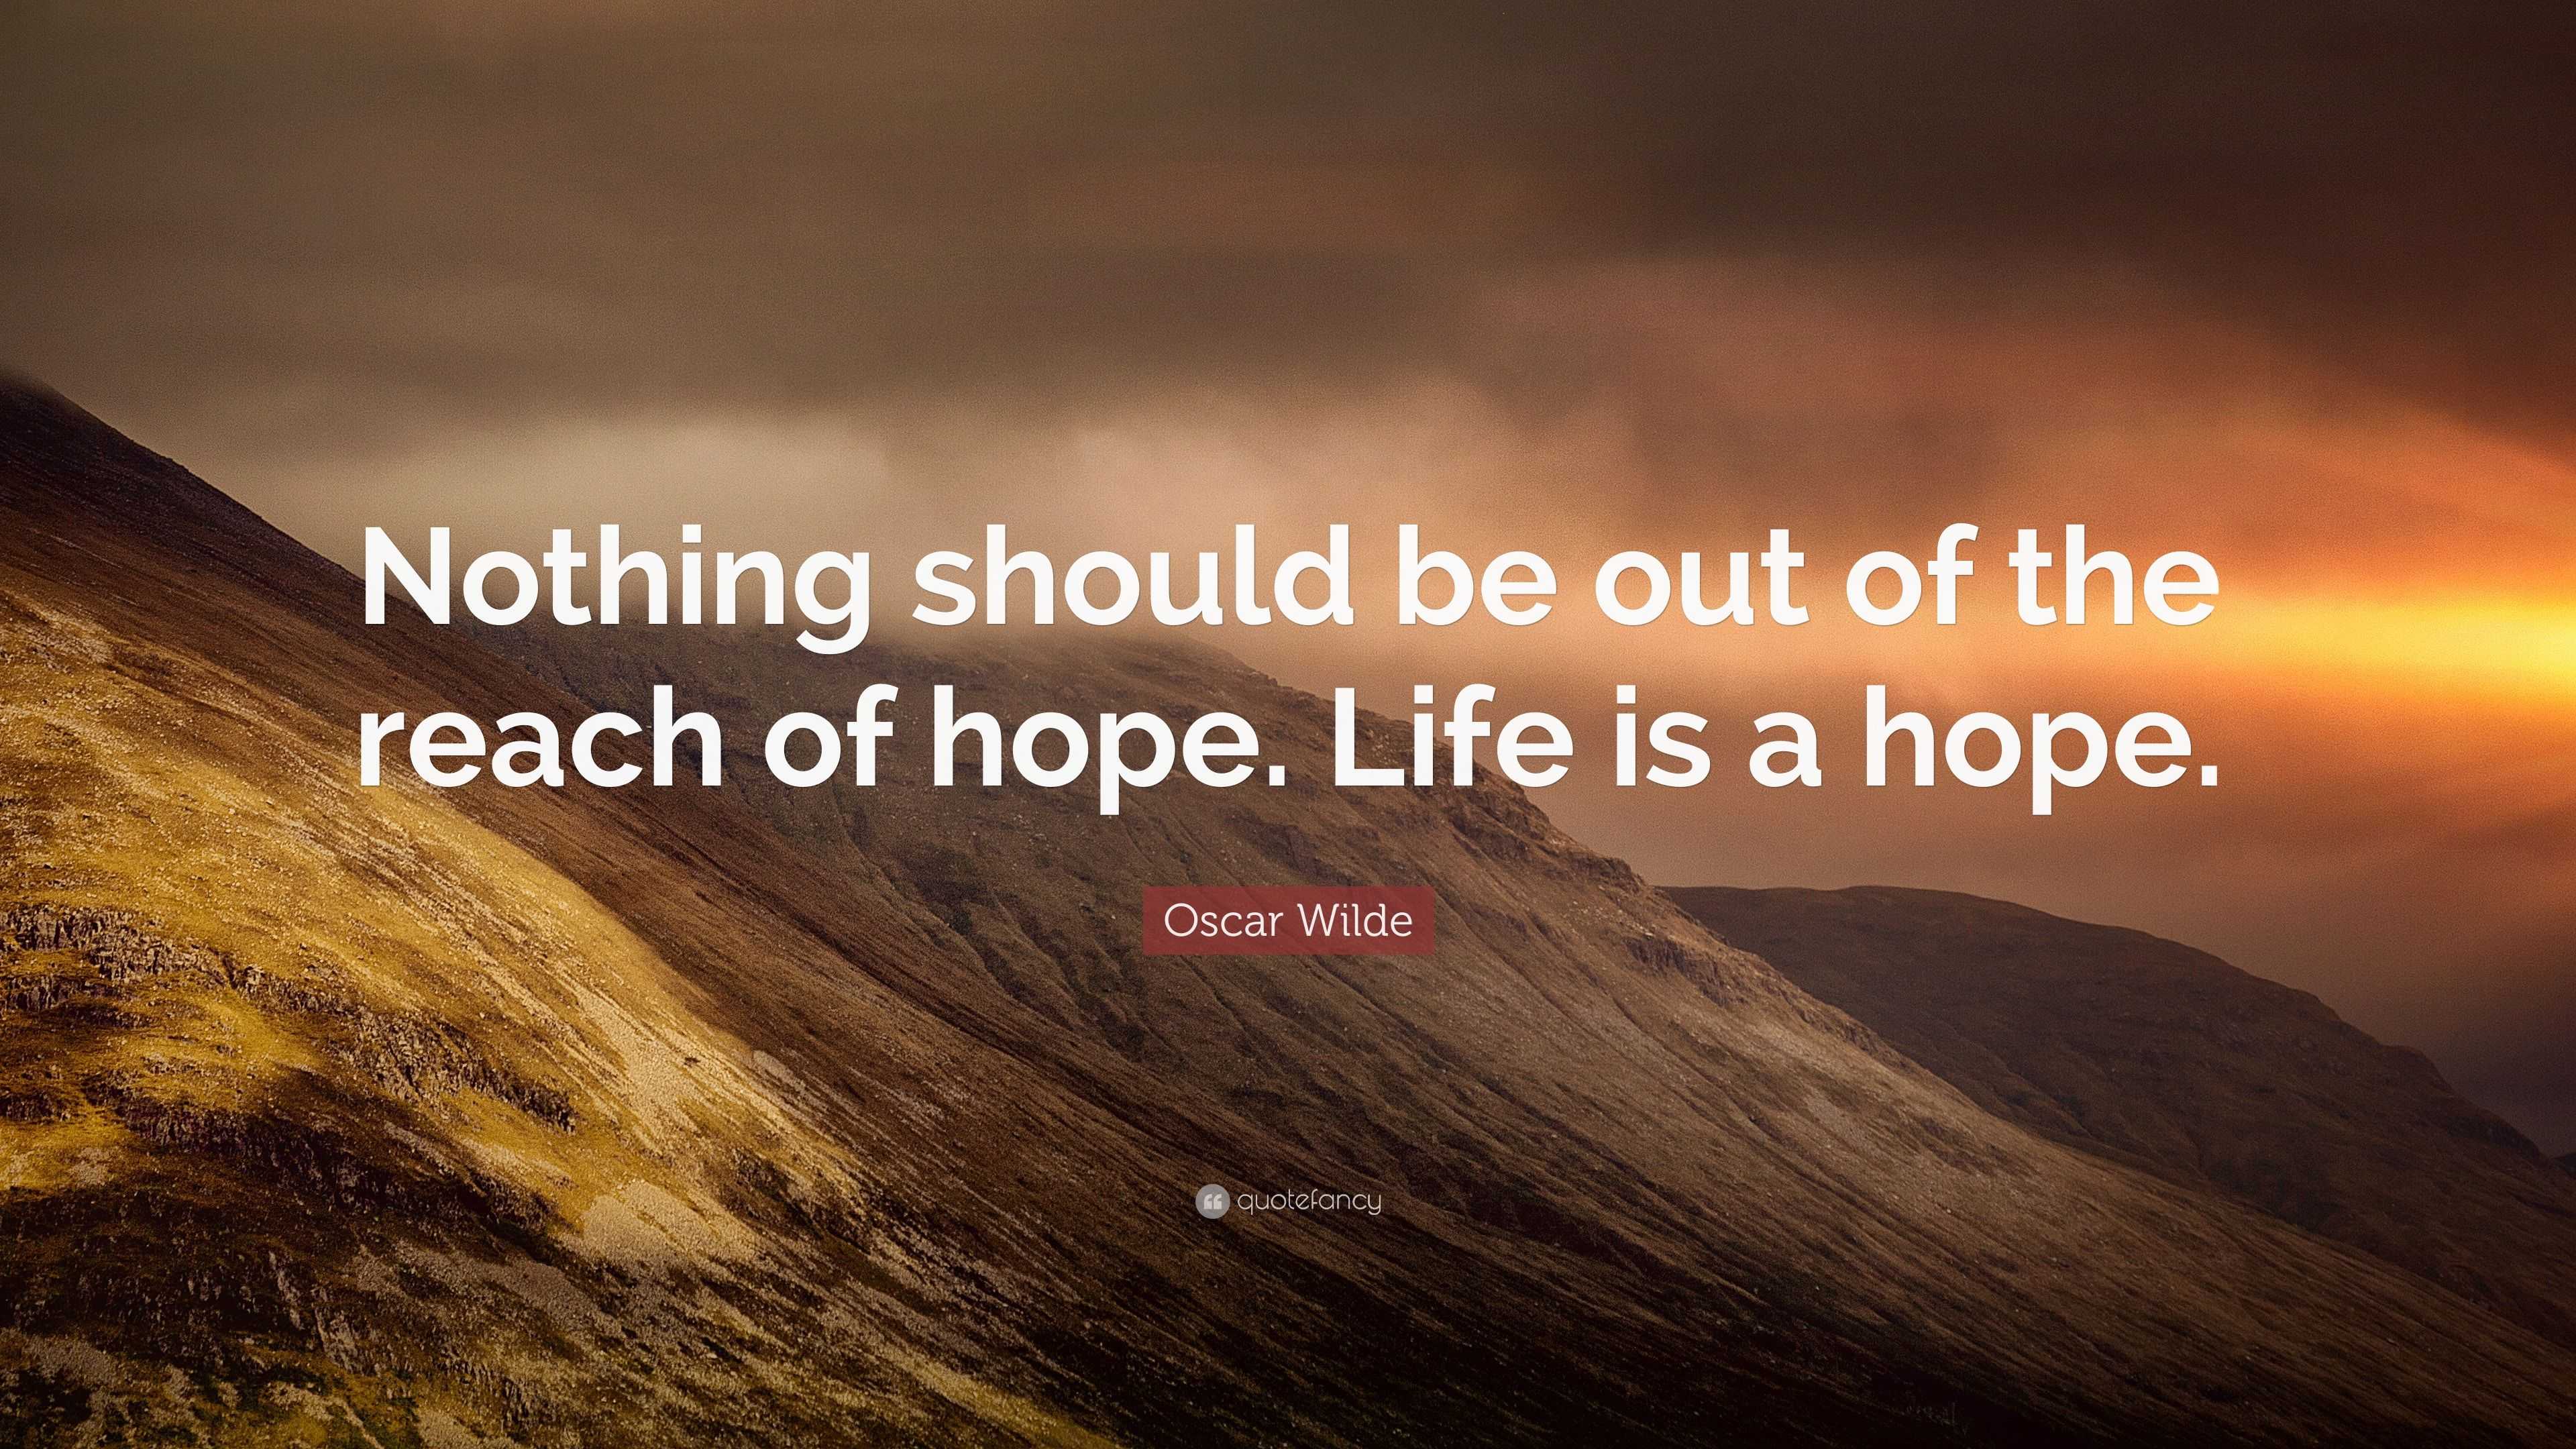 Oscar Wilde Quote: “Nothing should be out of the reach of hope. Life is ...